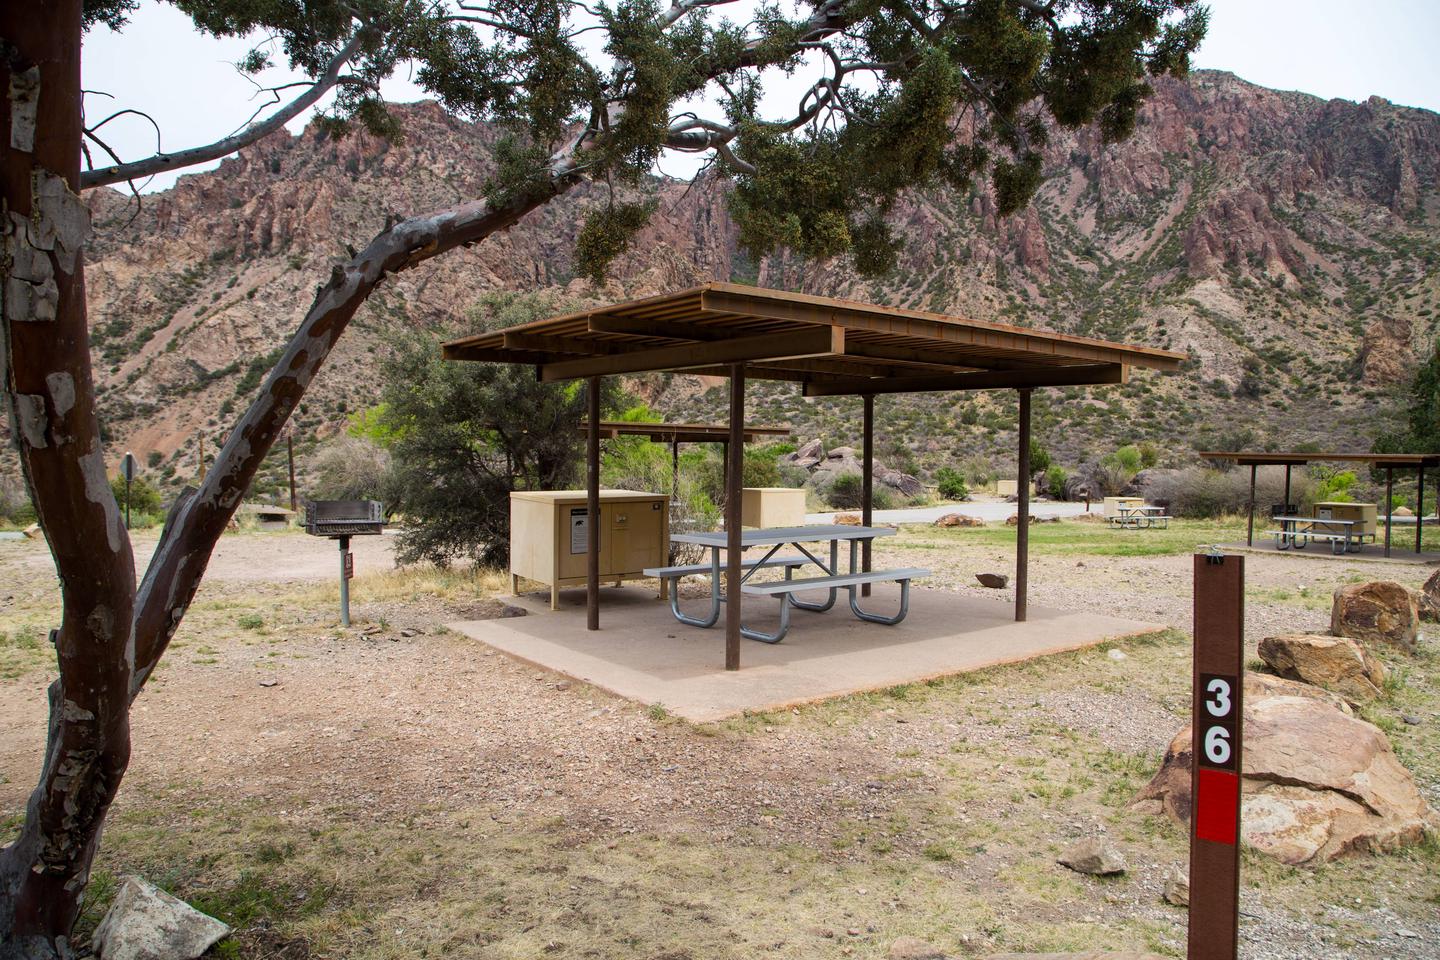 Chisos Basin Campsite #36 shade ramadaView of site showing shade ramada with grill, bear box, and picnic table.